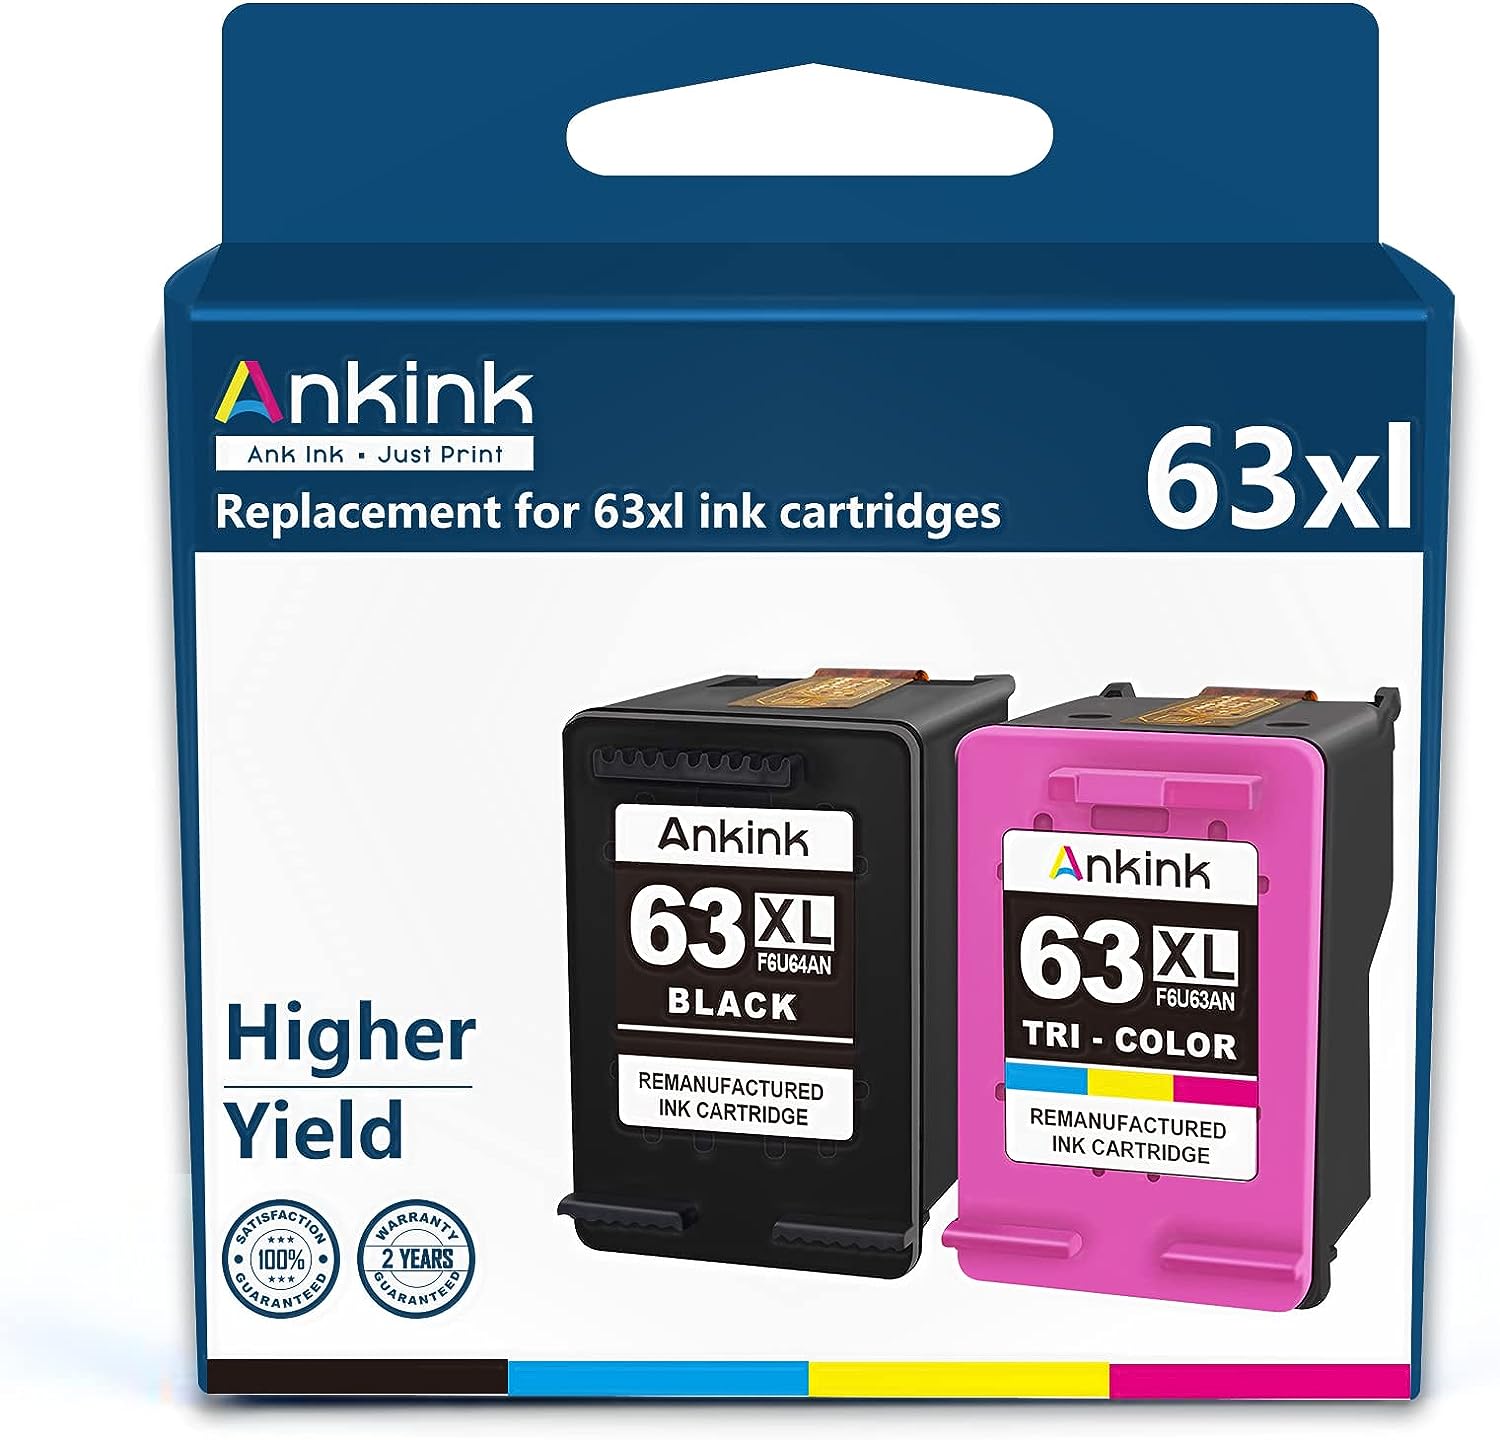 Ankink 4x Capacity 63XL Ink Cartridges Black and Color [...]